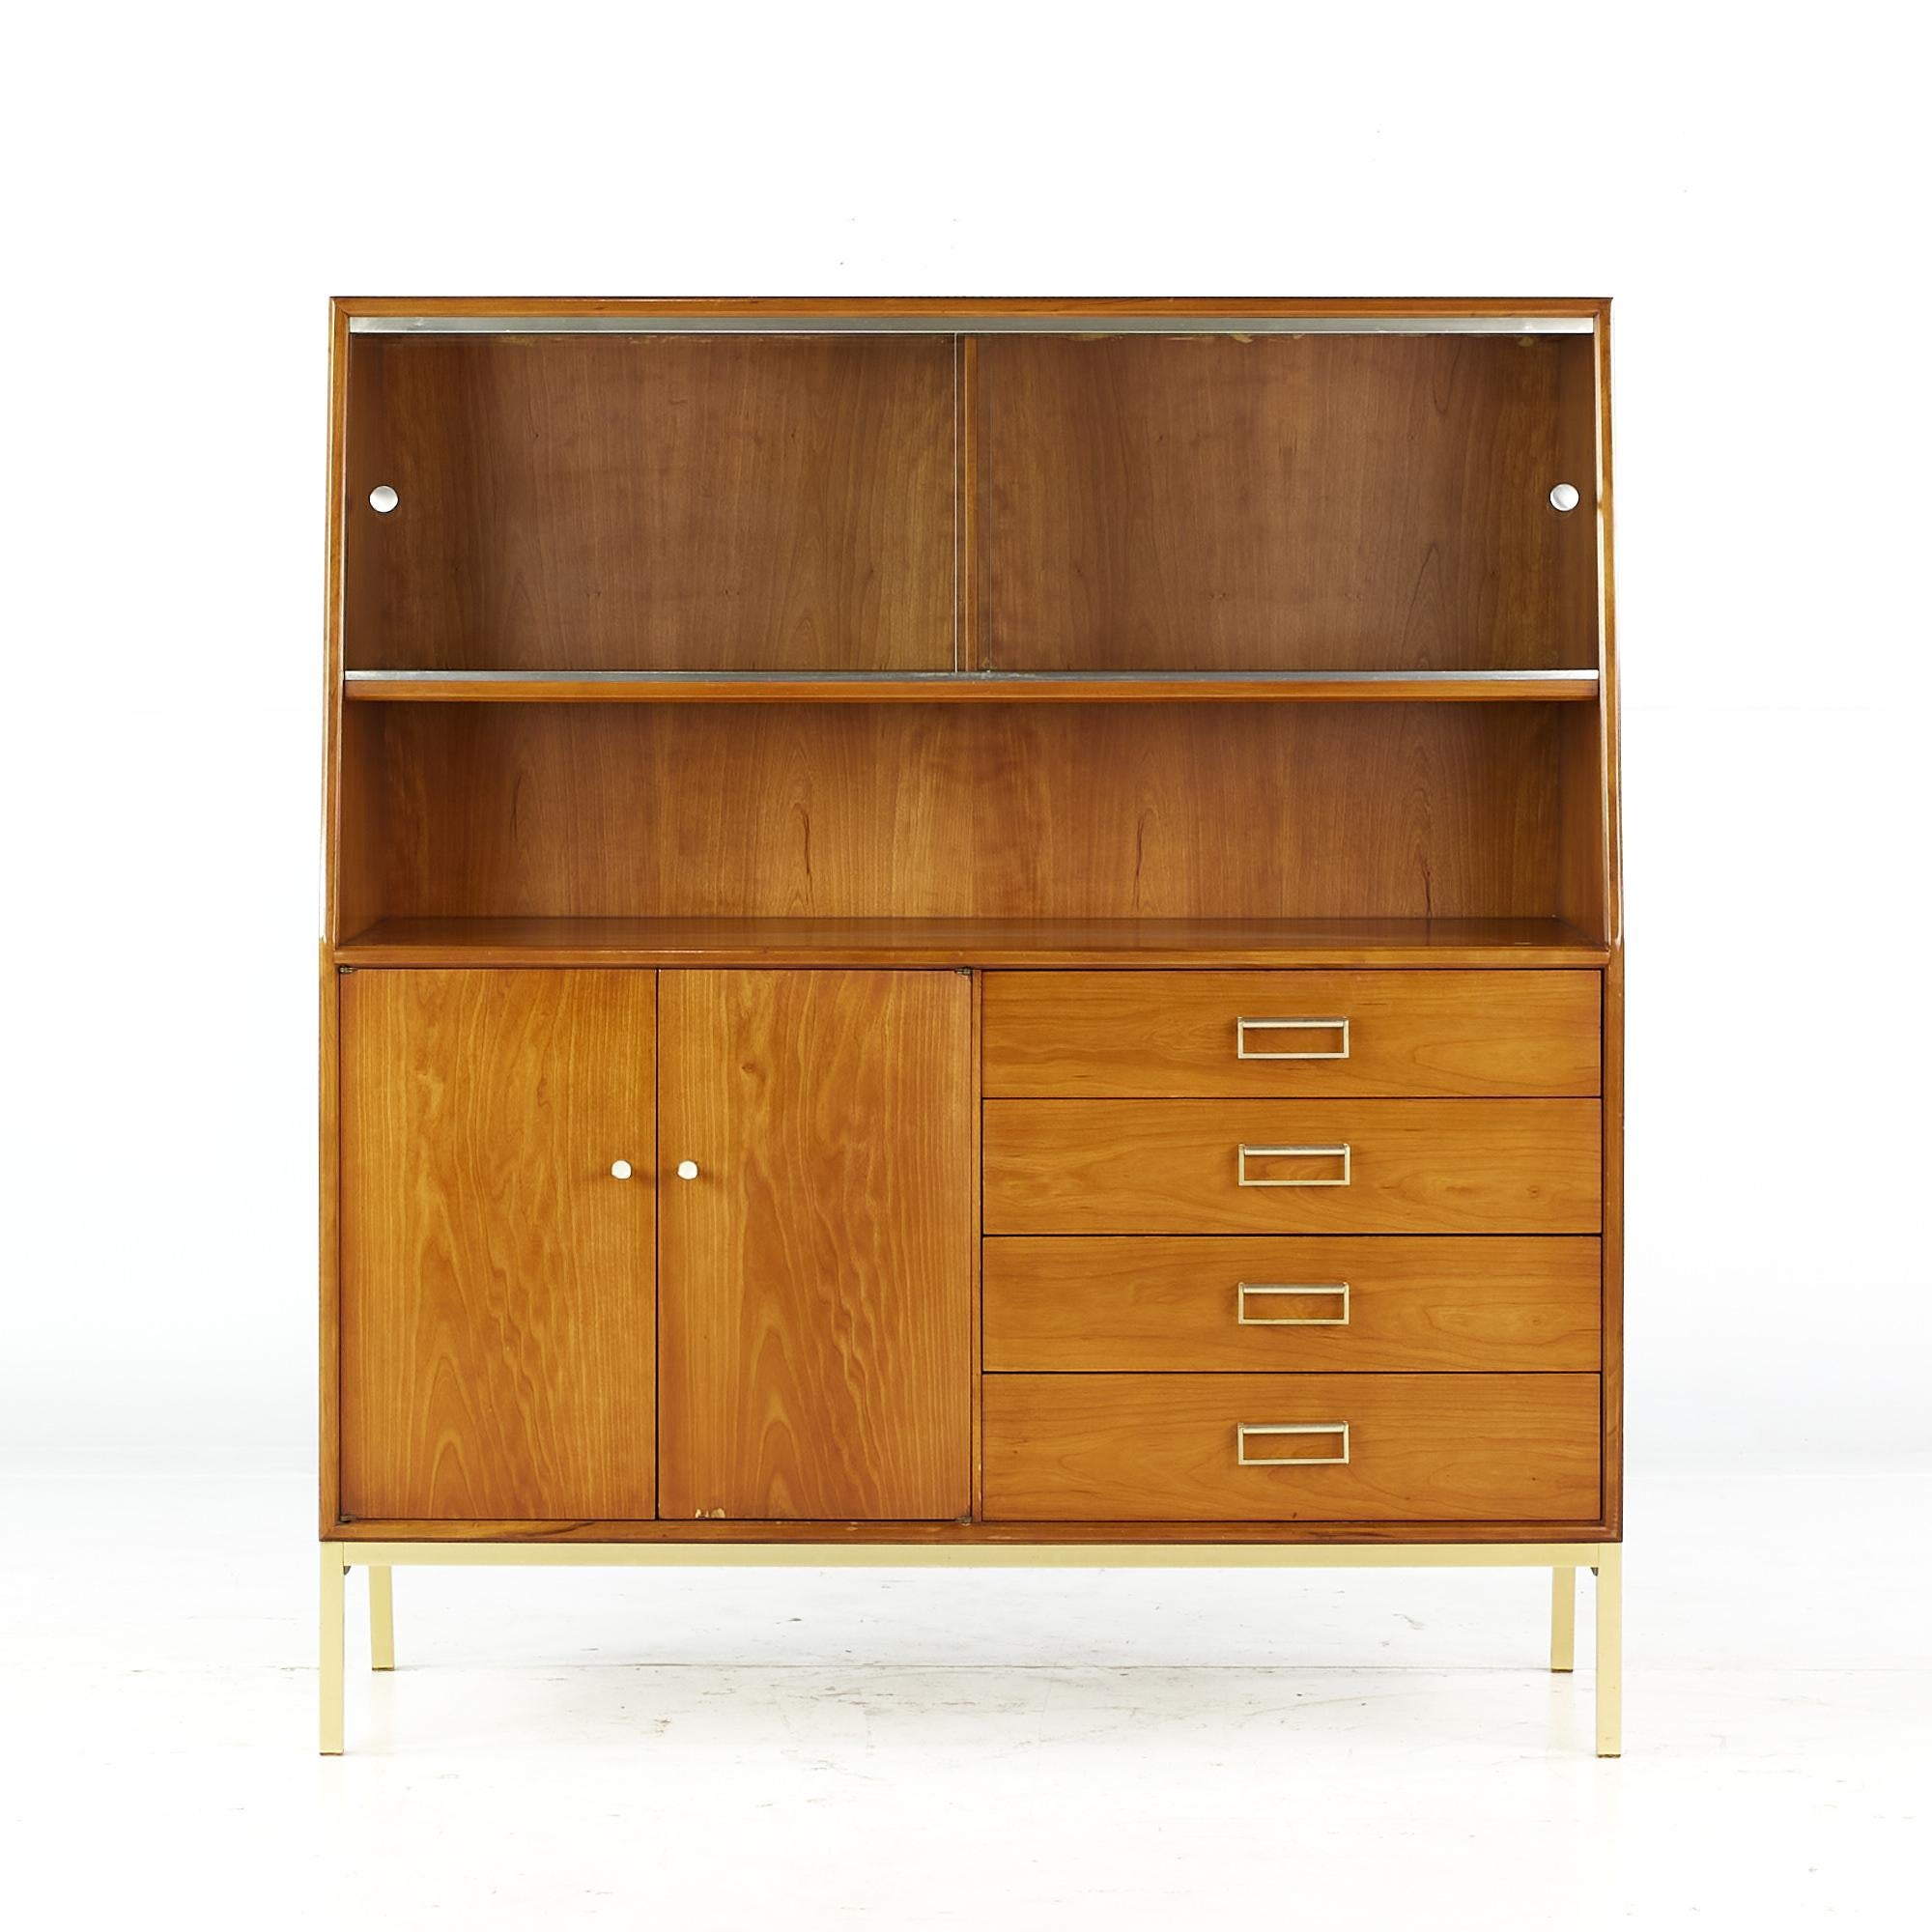 Drexel suncoast mid-century walnut, cane and brass buffet.

This buffet measures: 48 wide x 18 deep x 54 inches high.

All pieces of furniture can be had in what we call restored vintage condition. That means the piece is restored upon purchase